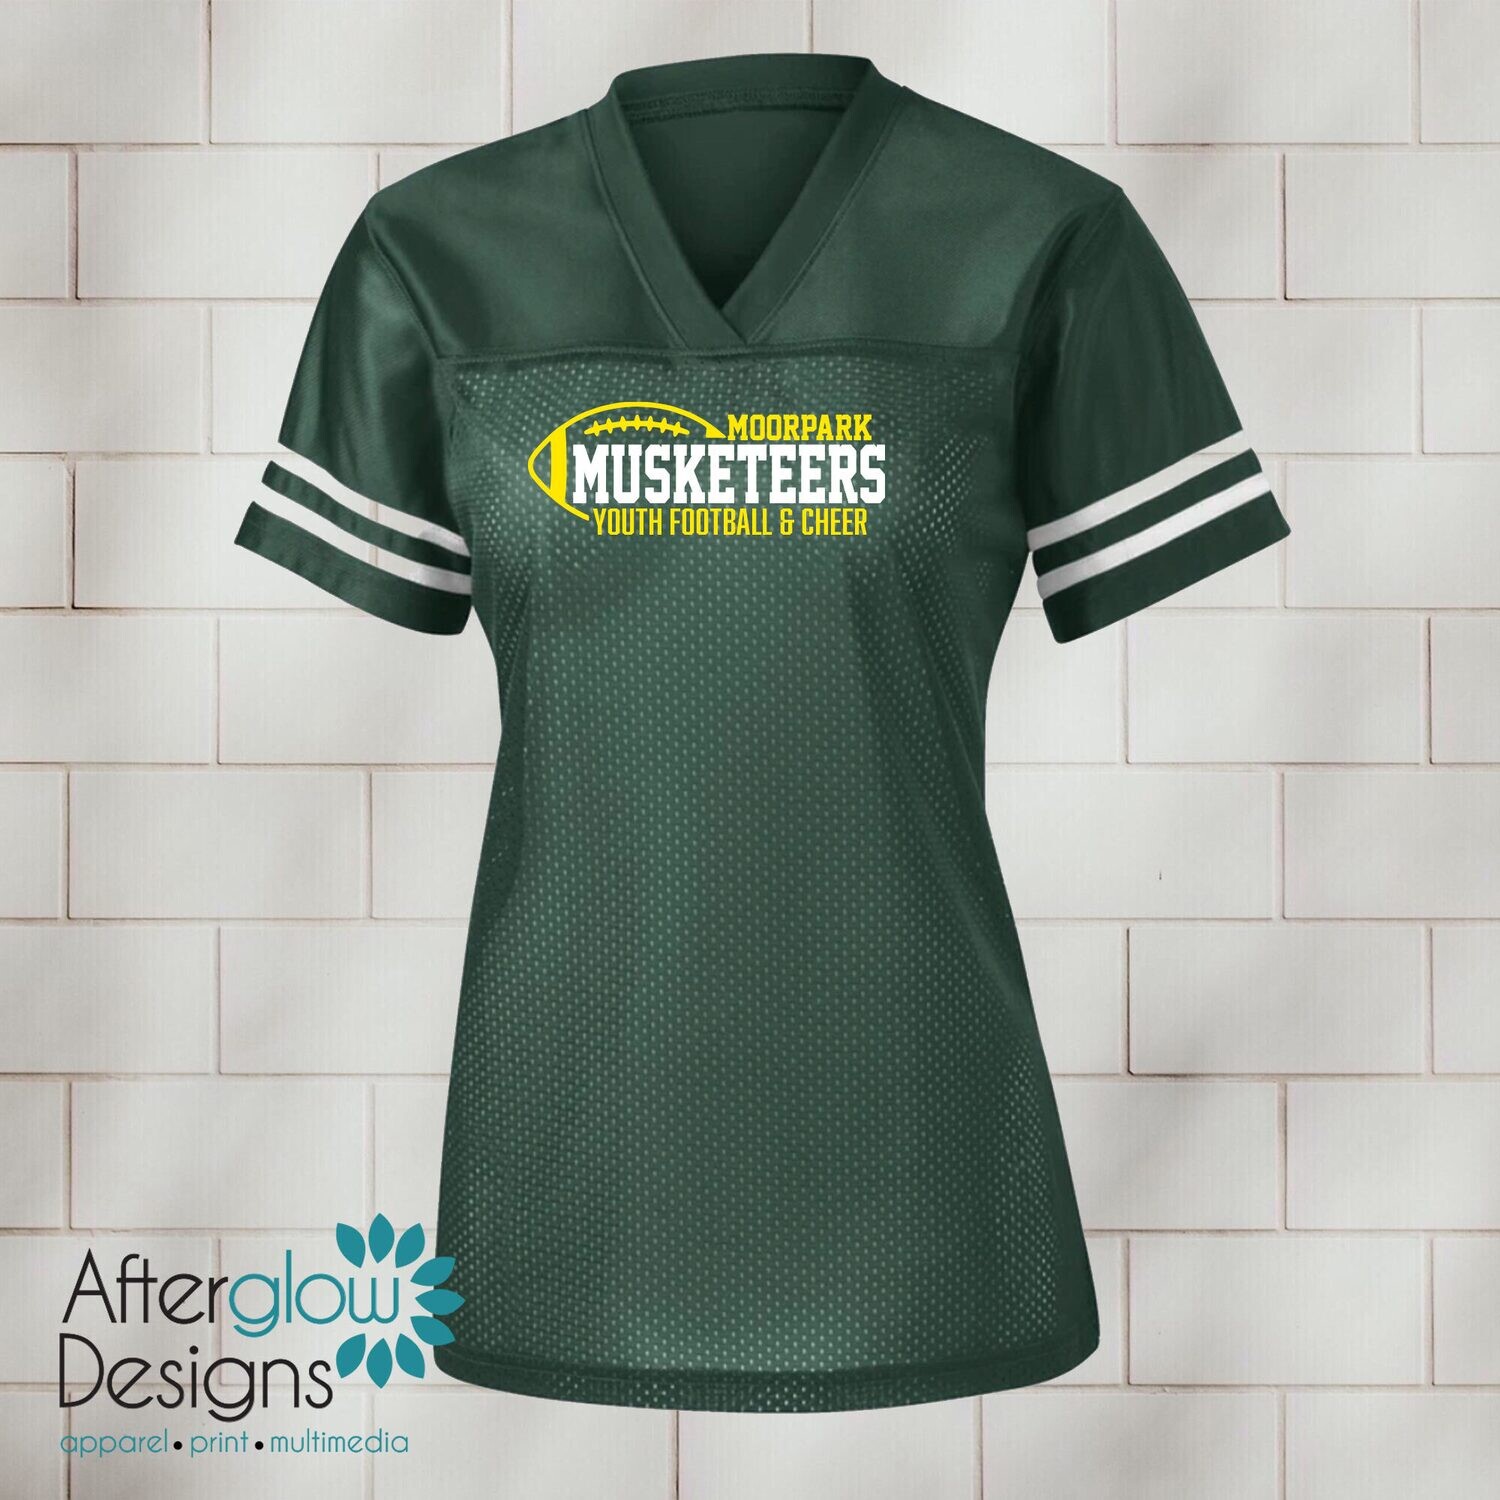 How to Decorate a Polyester Mesh Jersey